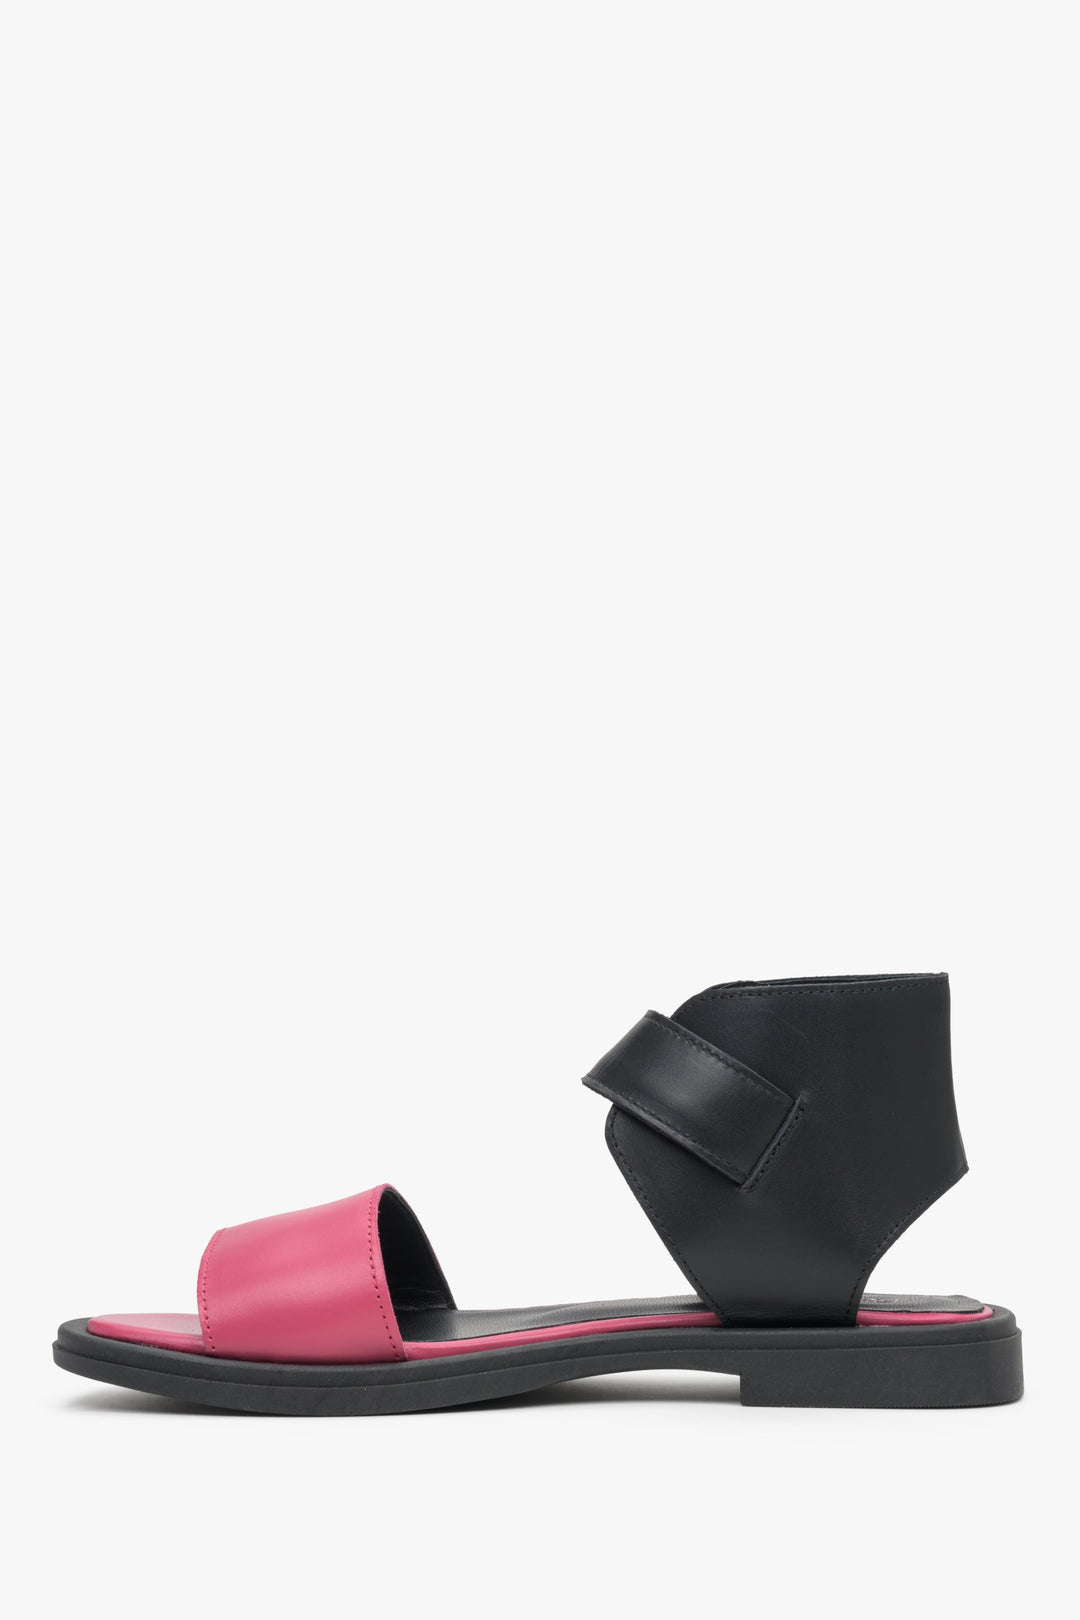 Women's black and pink Estro sandals made of natural leather - shoe profile.